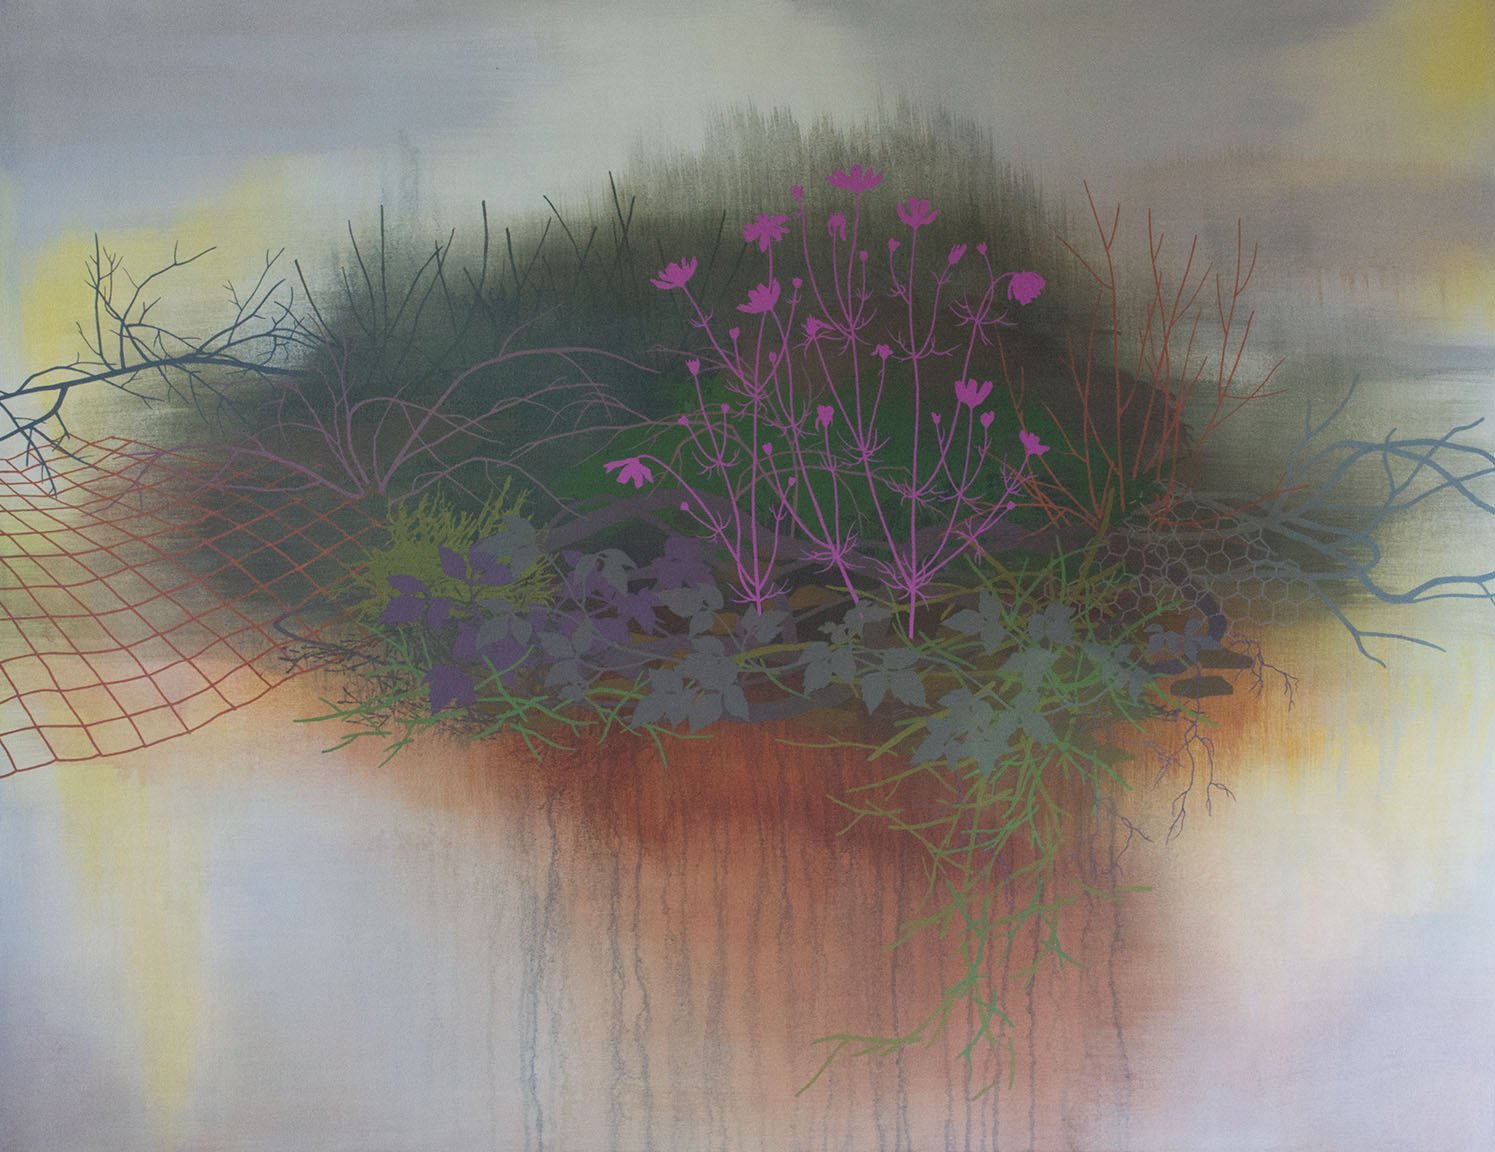   Accidental Planting  Acrylic on canvas 46 x 60 x 1.5” SOLD   